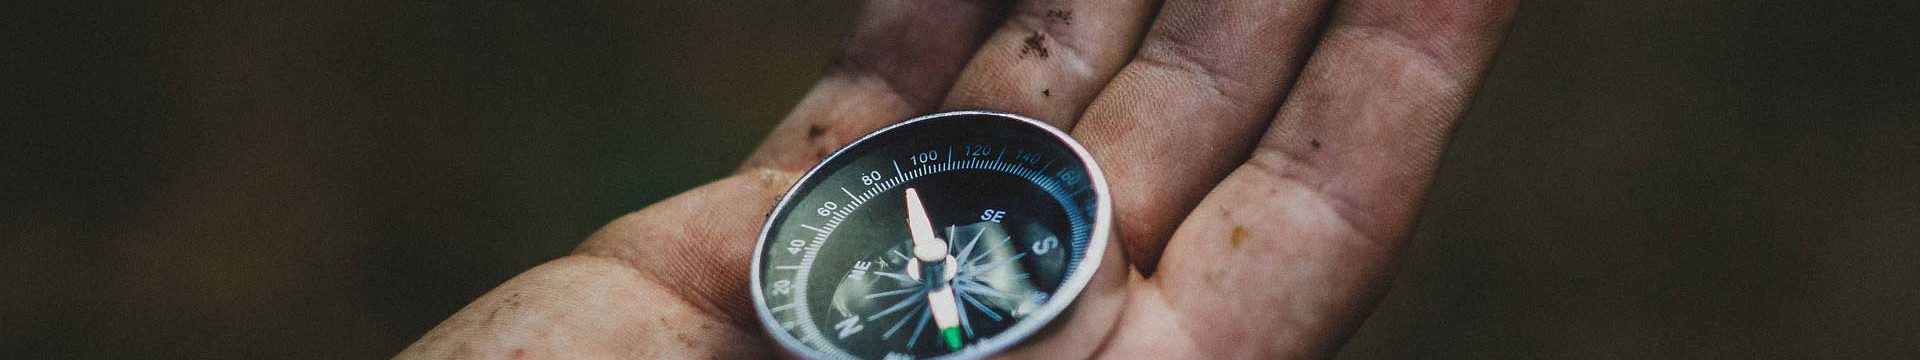 Compass for the self employed